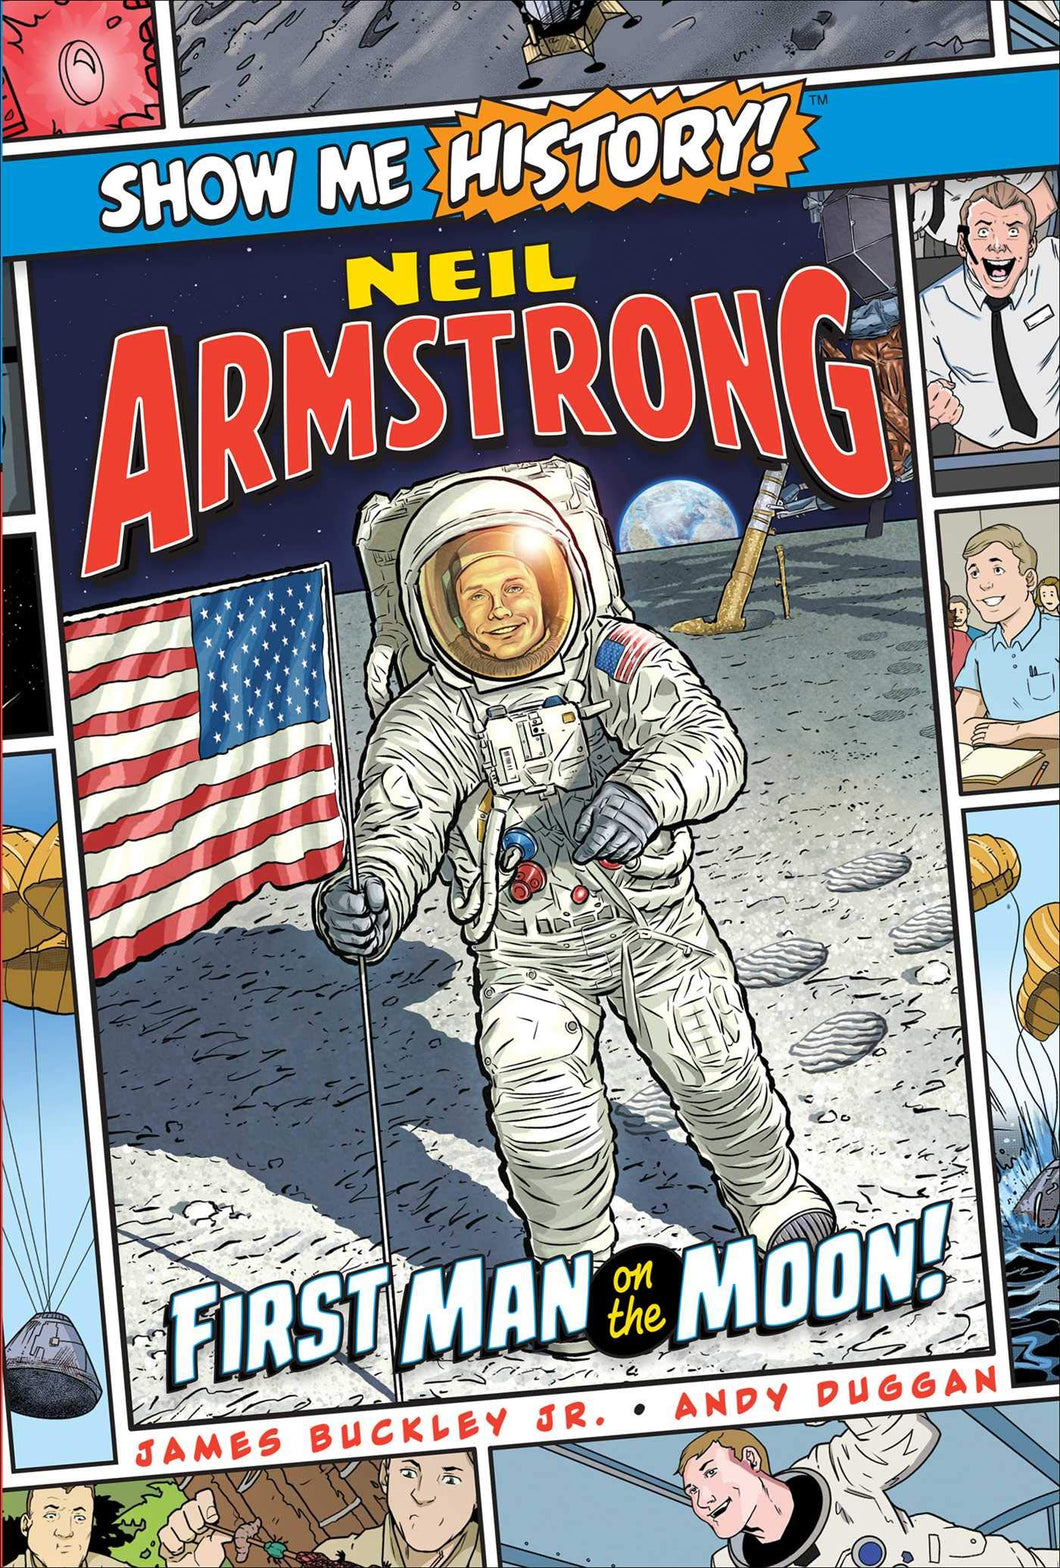 Show Me History Neil Armstrong: First Man on the Moon!